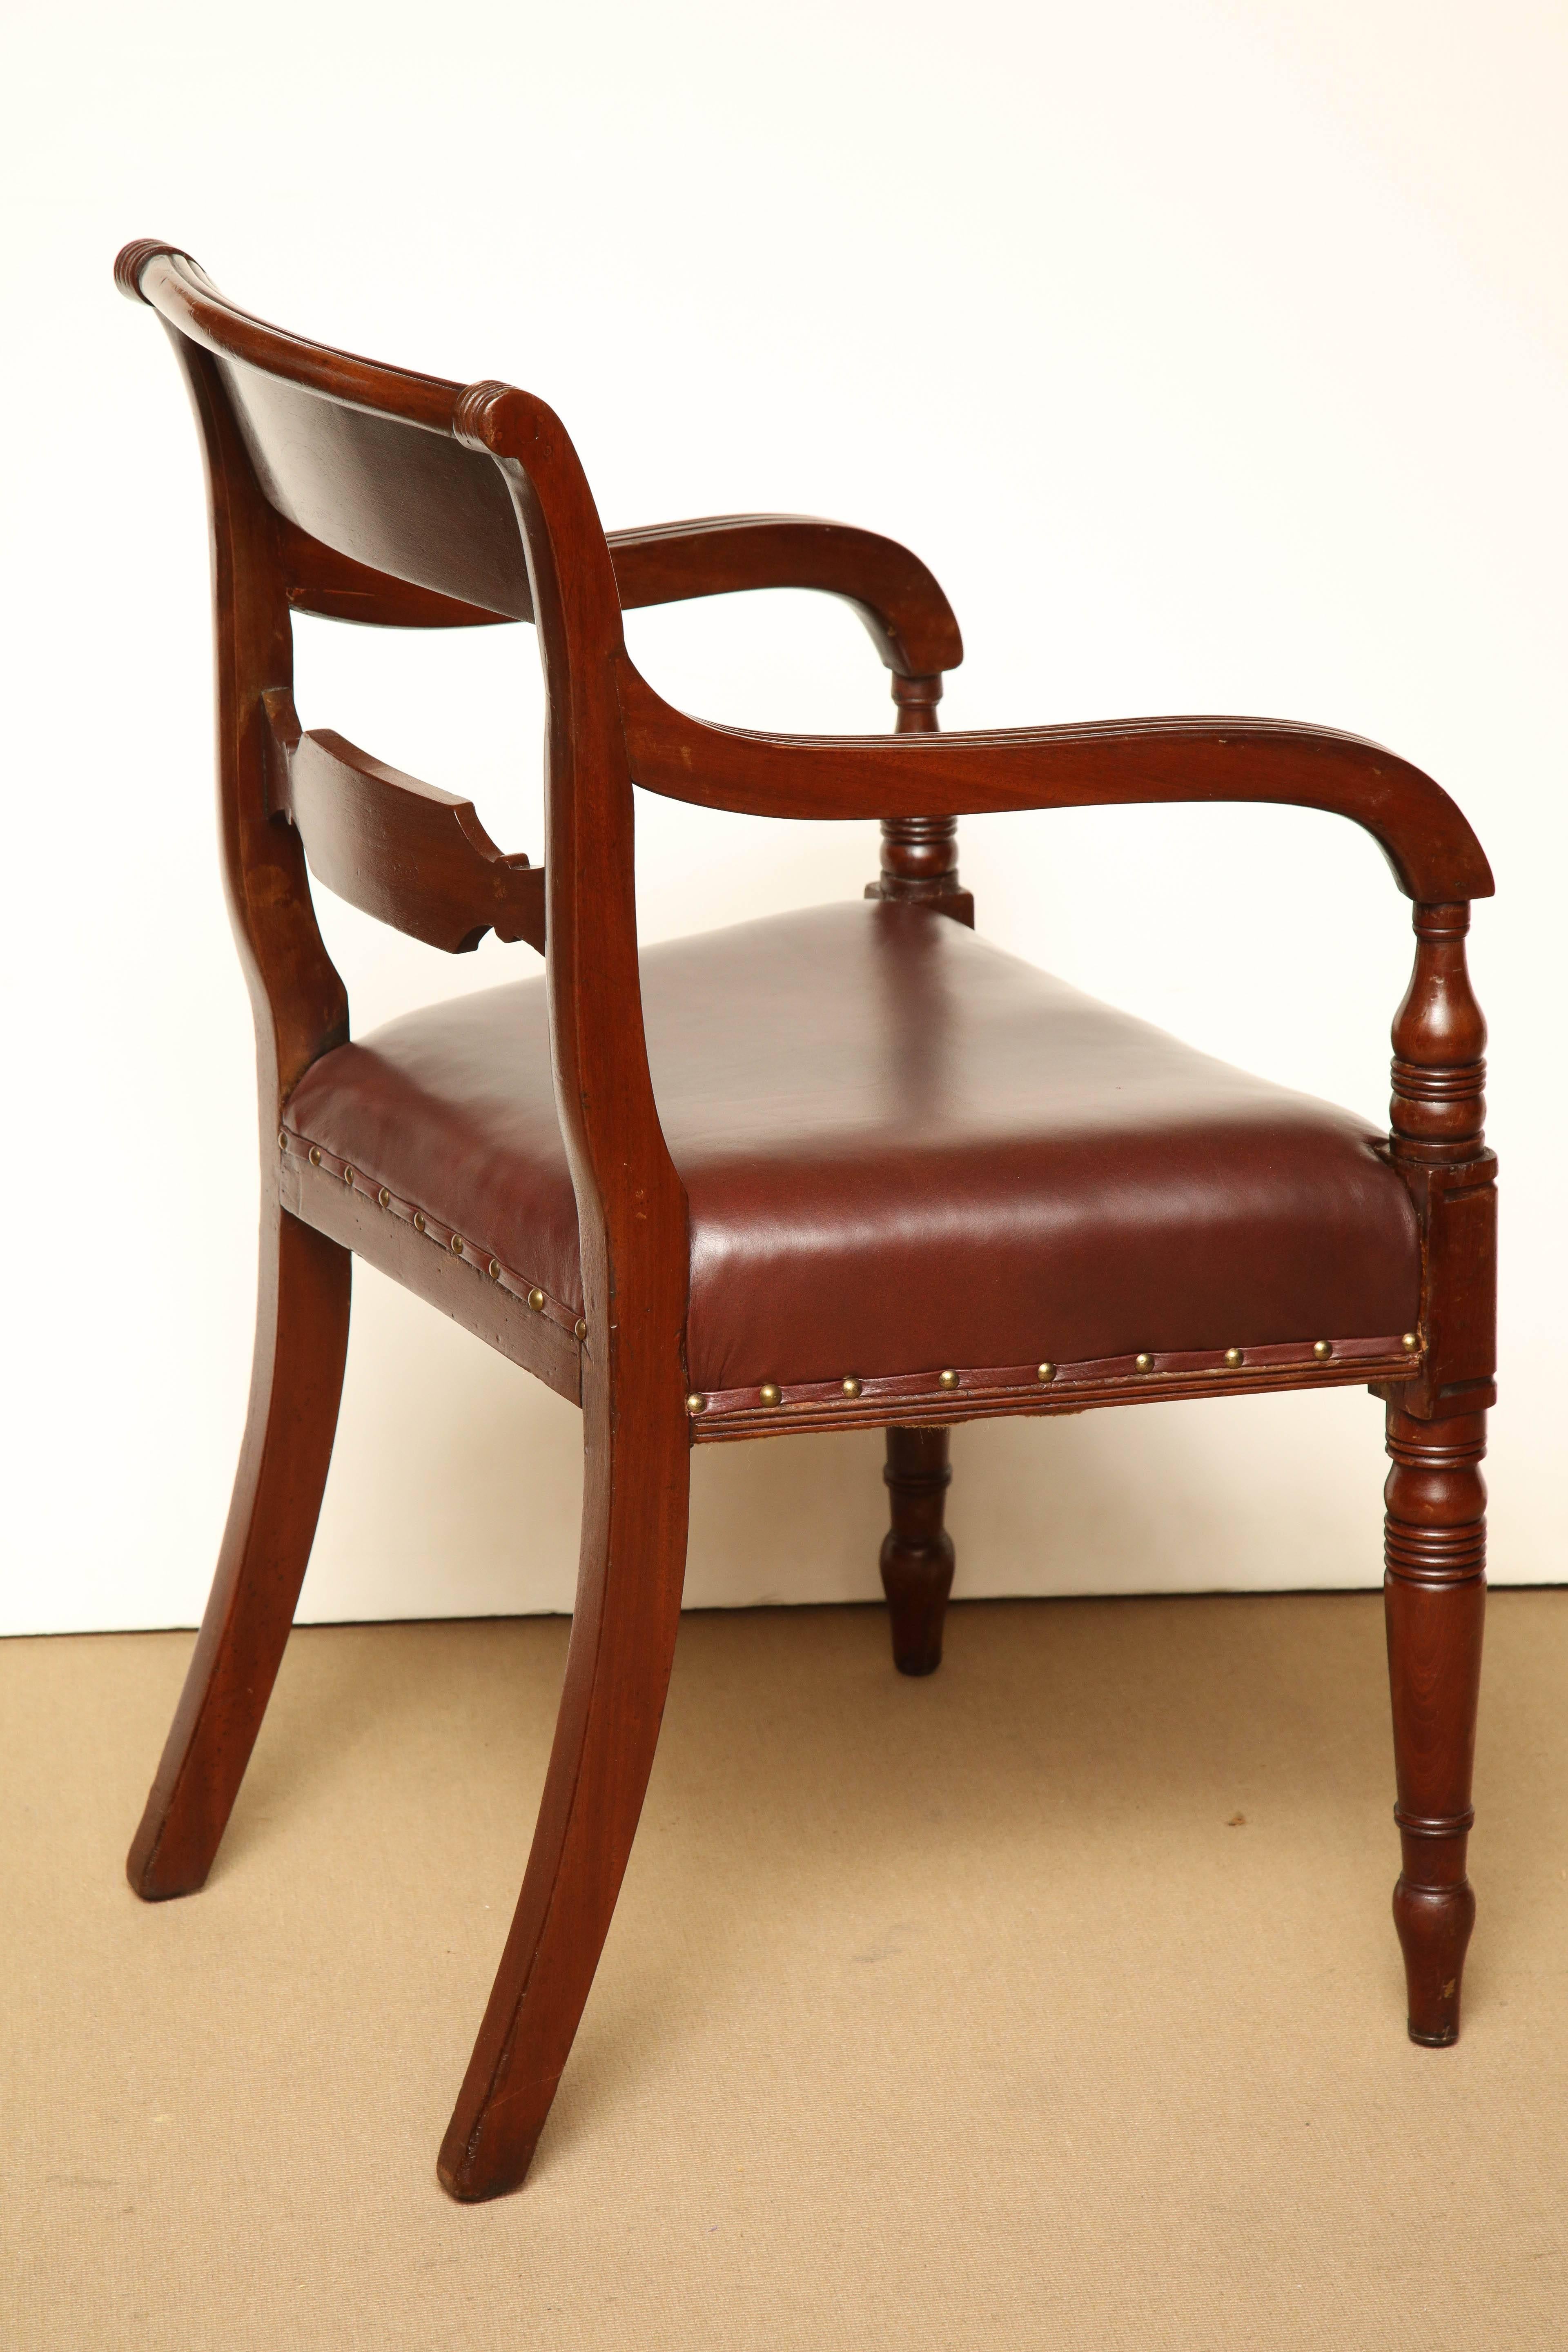 Early 19th Century English Regency, Mahogany and Brass Inlay Desk Chair For Sale 4